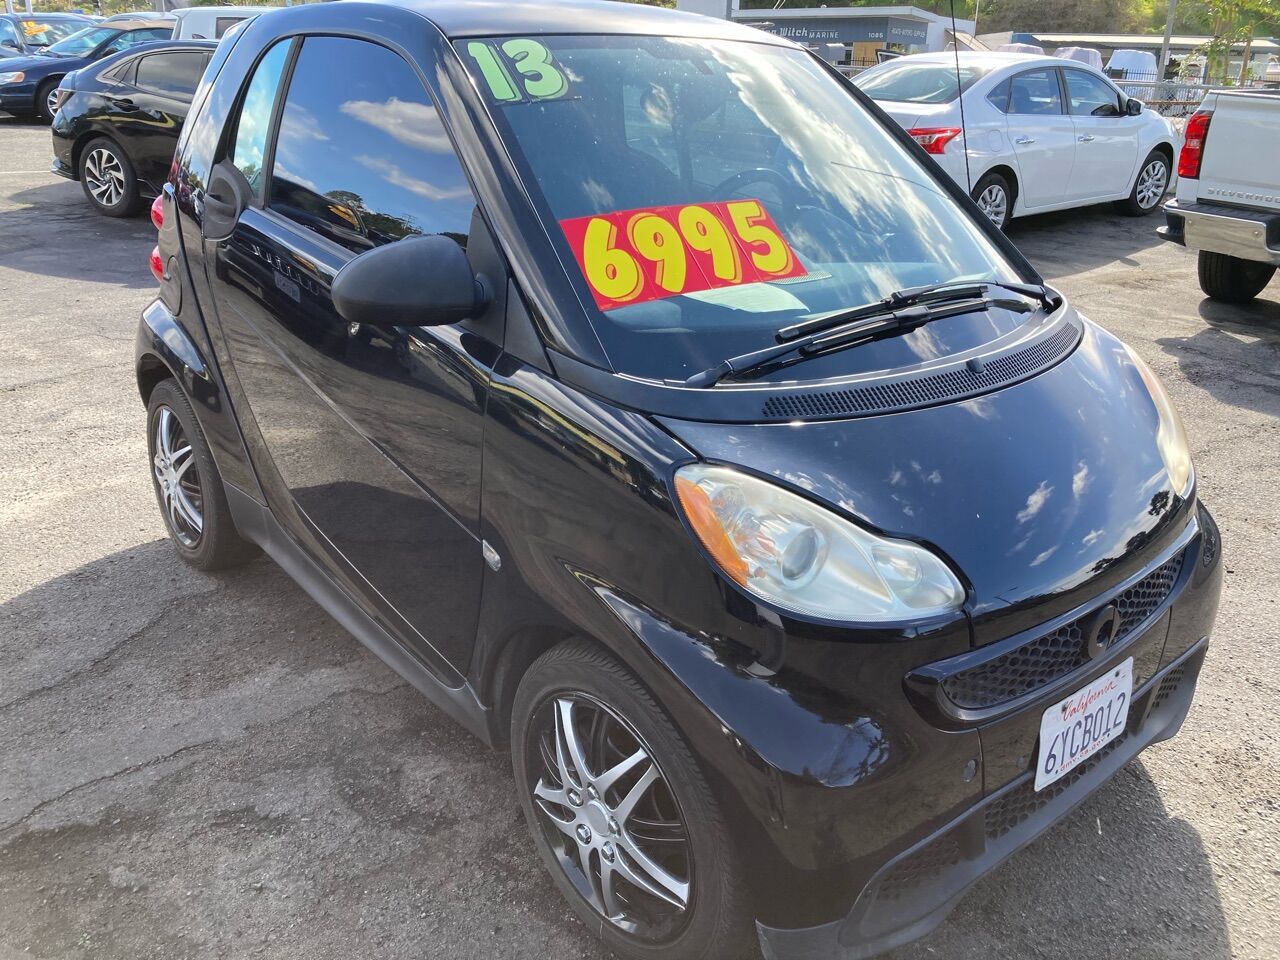 Used 2013 smart fortwo for Sale Near Me